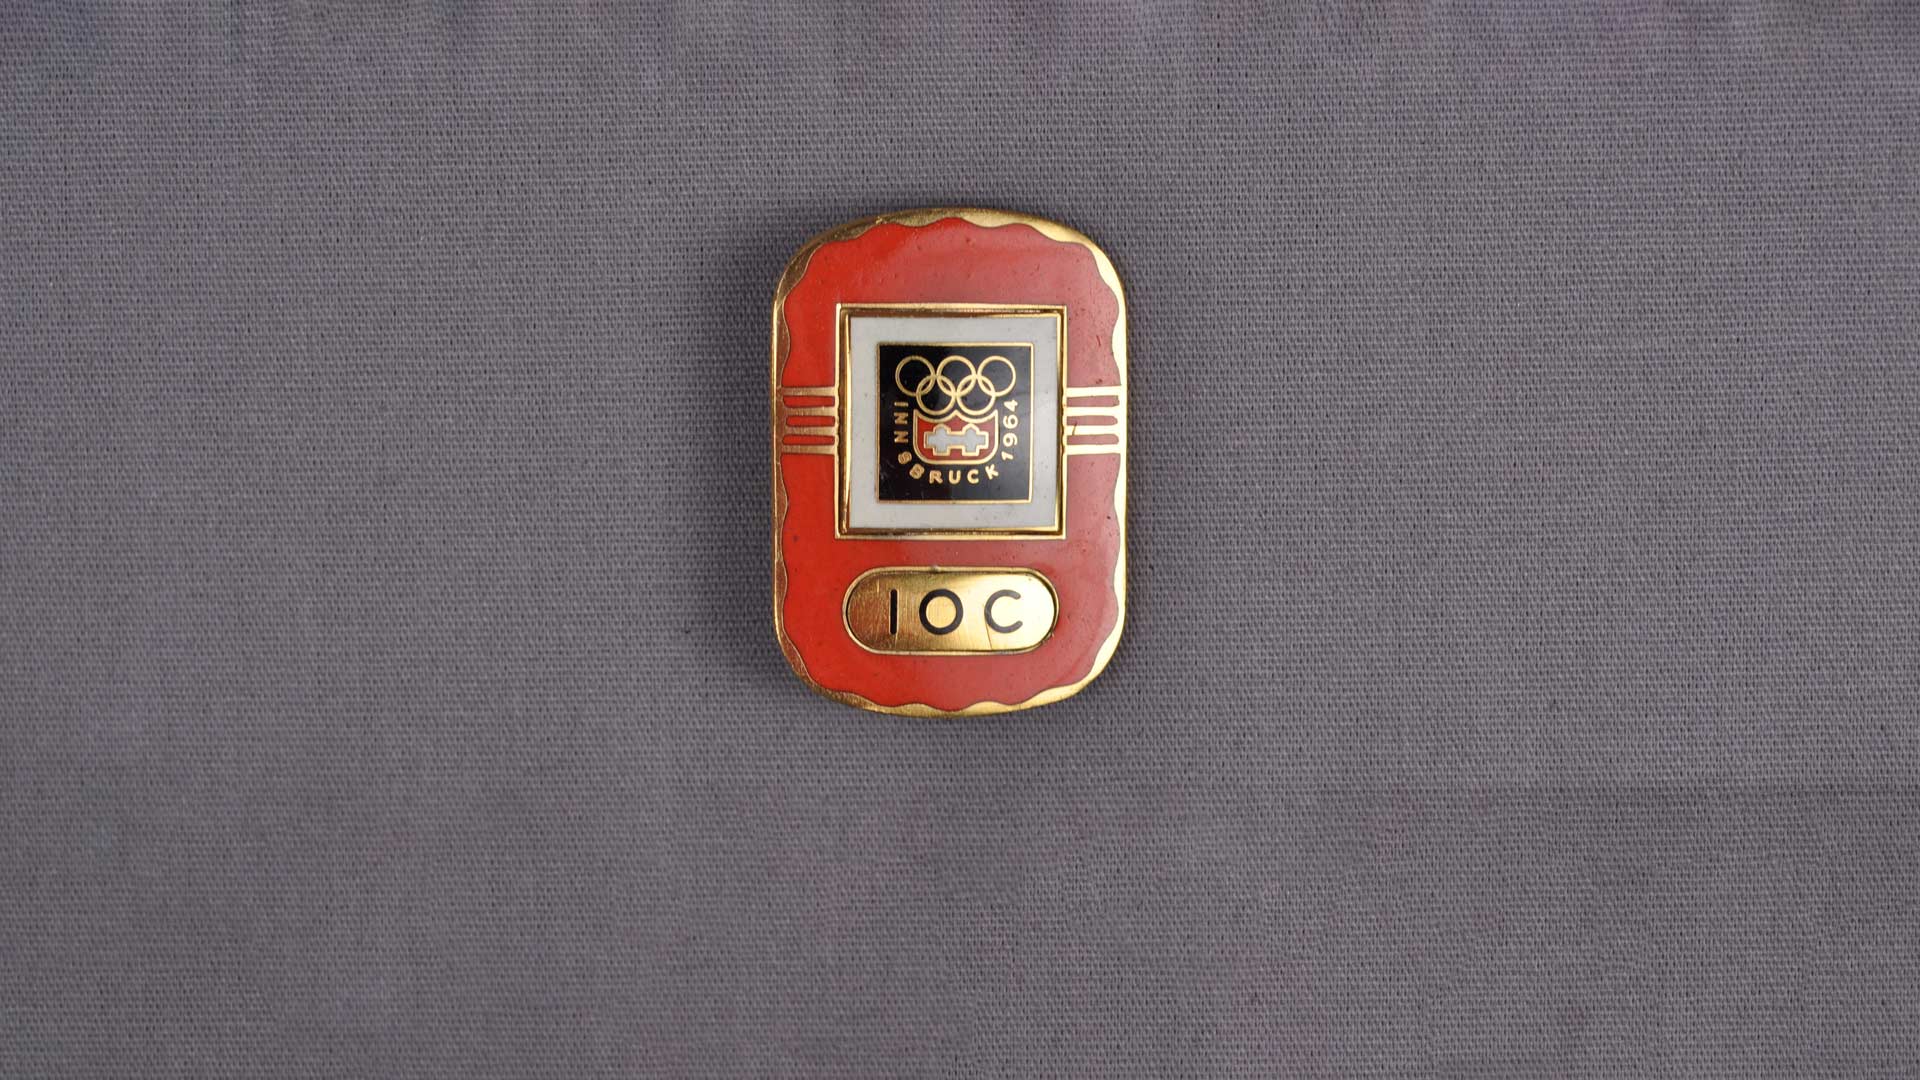 pin from 1964 Winter Olympics